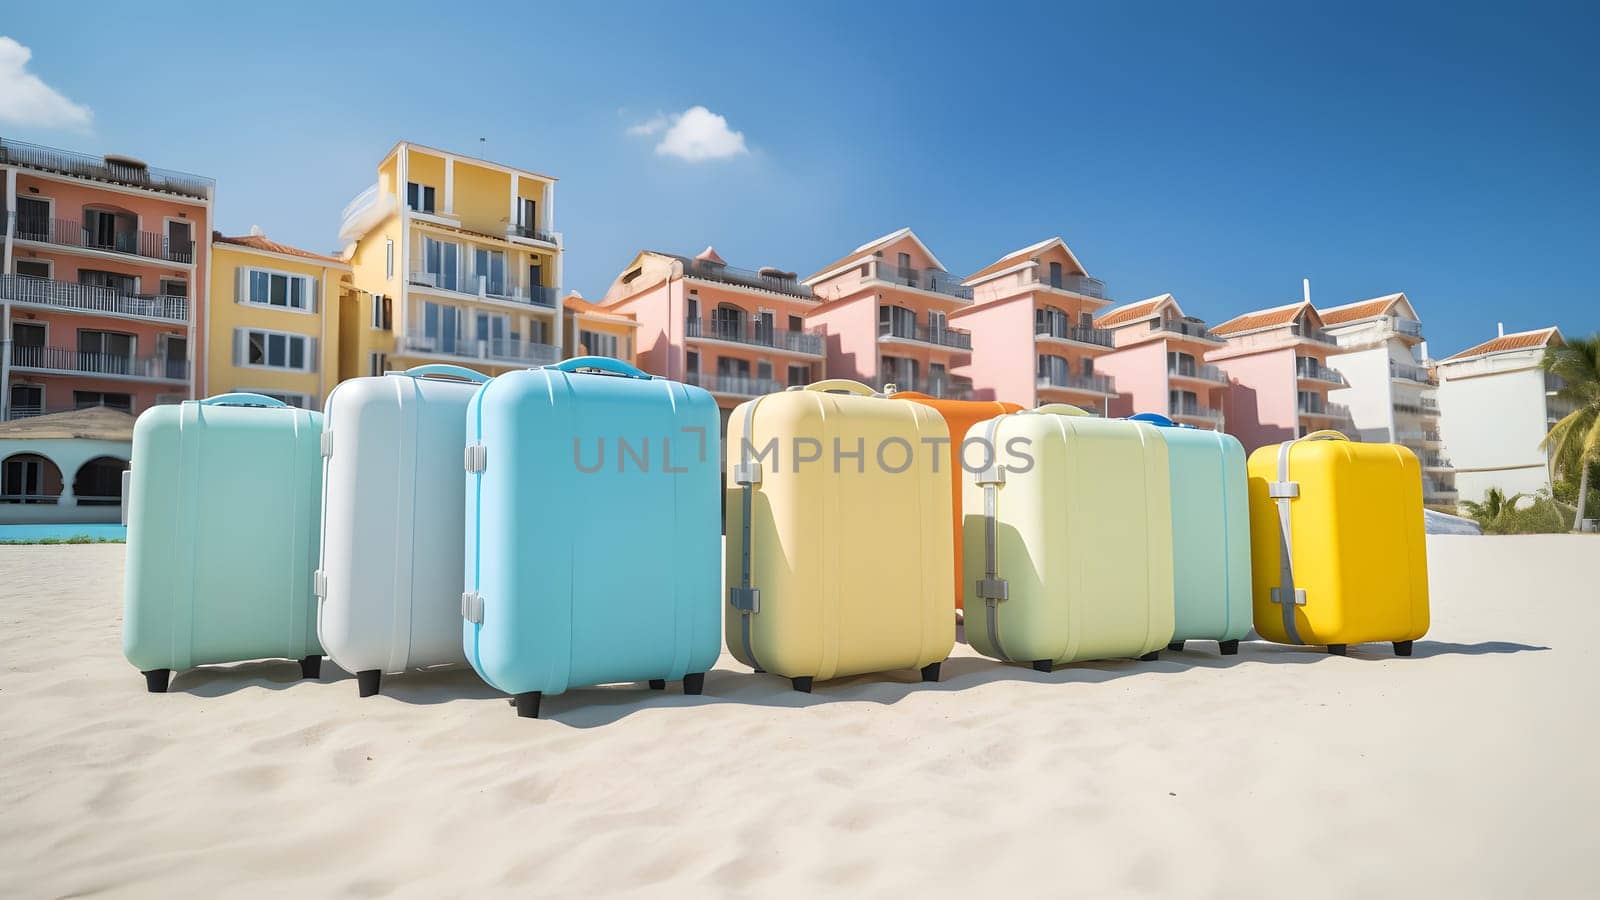 Few modern suitcases on tropical resort beach in front of coast town houses at sunny day. Neural network generated in May 2023. Not based on any actual person, scene or pattern.